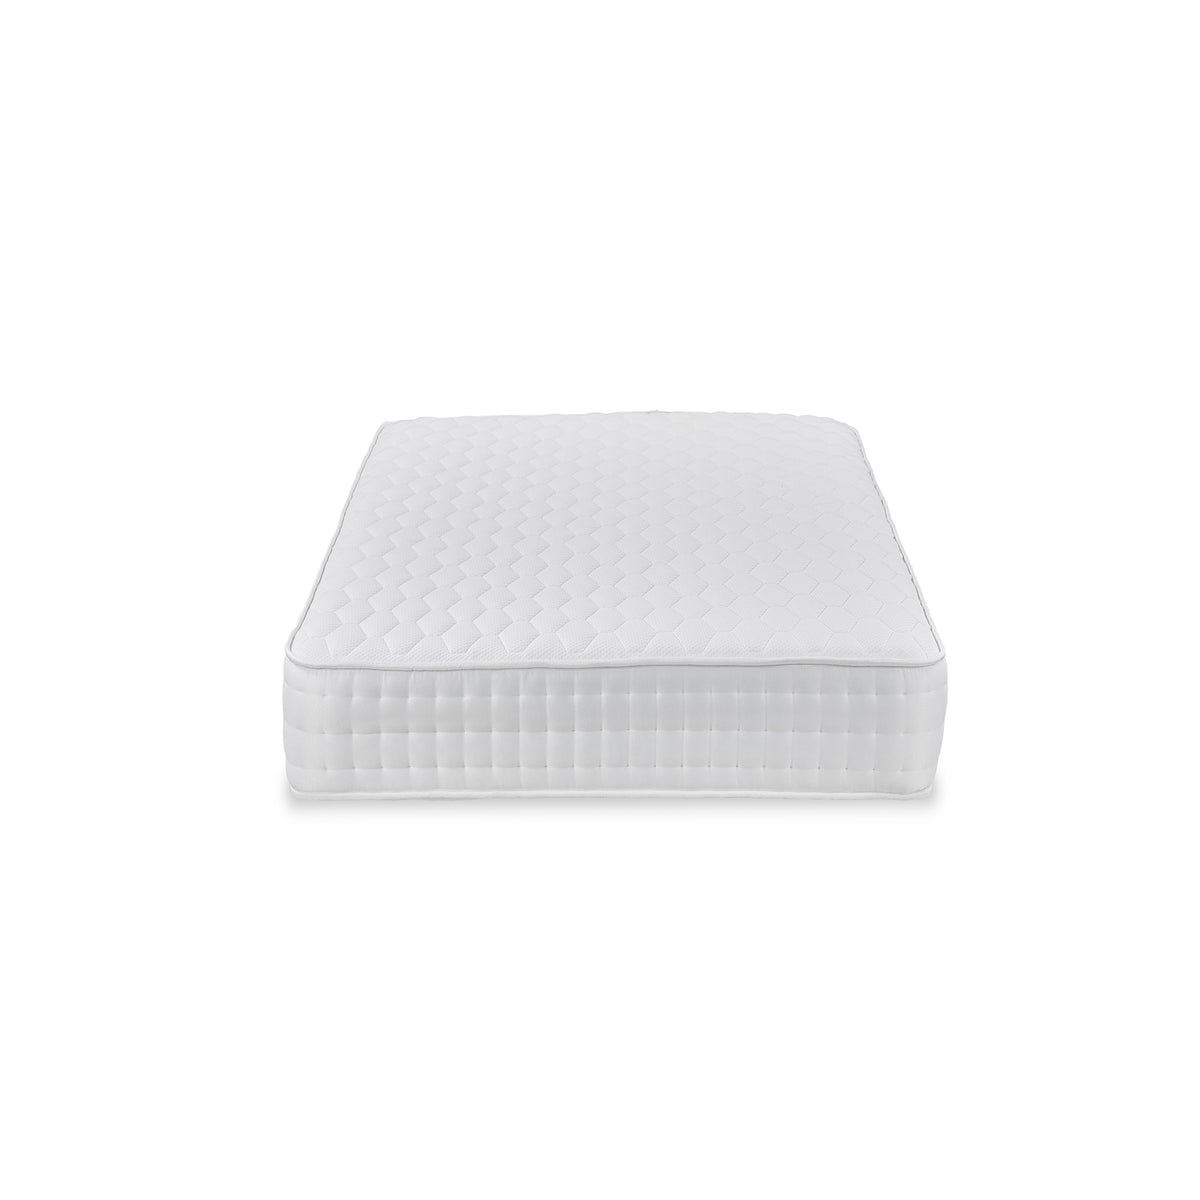 Roseland Sleep Classic Pocket Sprung Memory Foam Quilted Mattress 4ft small double